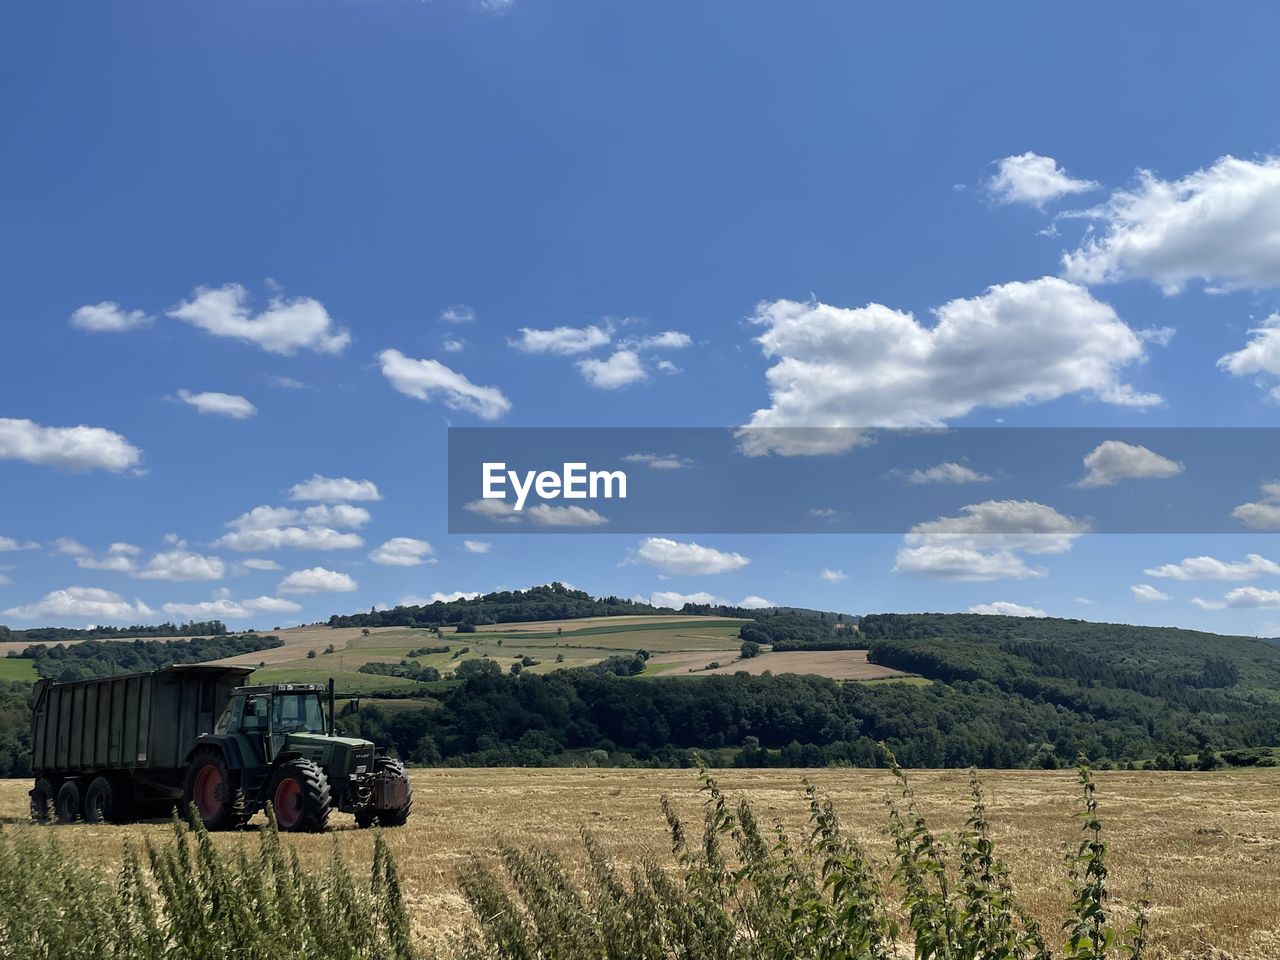 landscape, field, sky, agriculture, land, environment, rural scene, rural area, plant, cloud, nature, grass, transportation, farm, prairie, grassland, plain, mode of transportation, crop, horizon, land vehicle, scenics - nature, blue, meadow, hill, agricultural equipment, tractor, agricultural machinery, day, pasture, growth, harvesting, beauty in nature, food, no people, food and drink, vehicle, outdoors, machinery, tree, travel, cereal plant, non-urban scene, sunlight